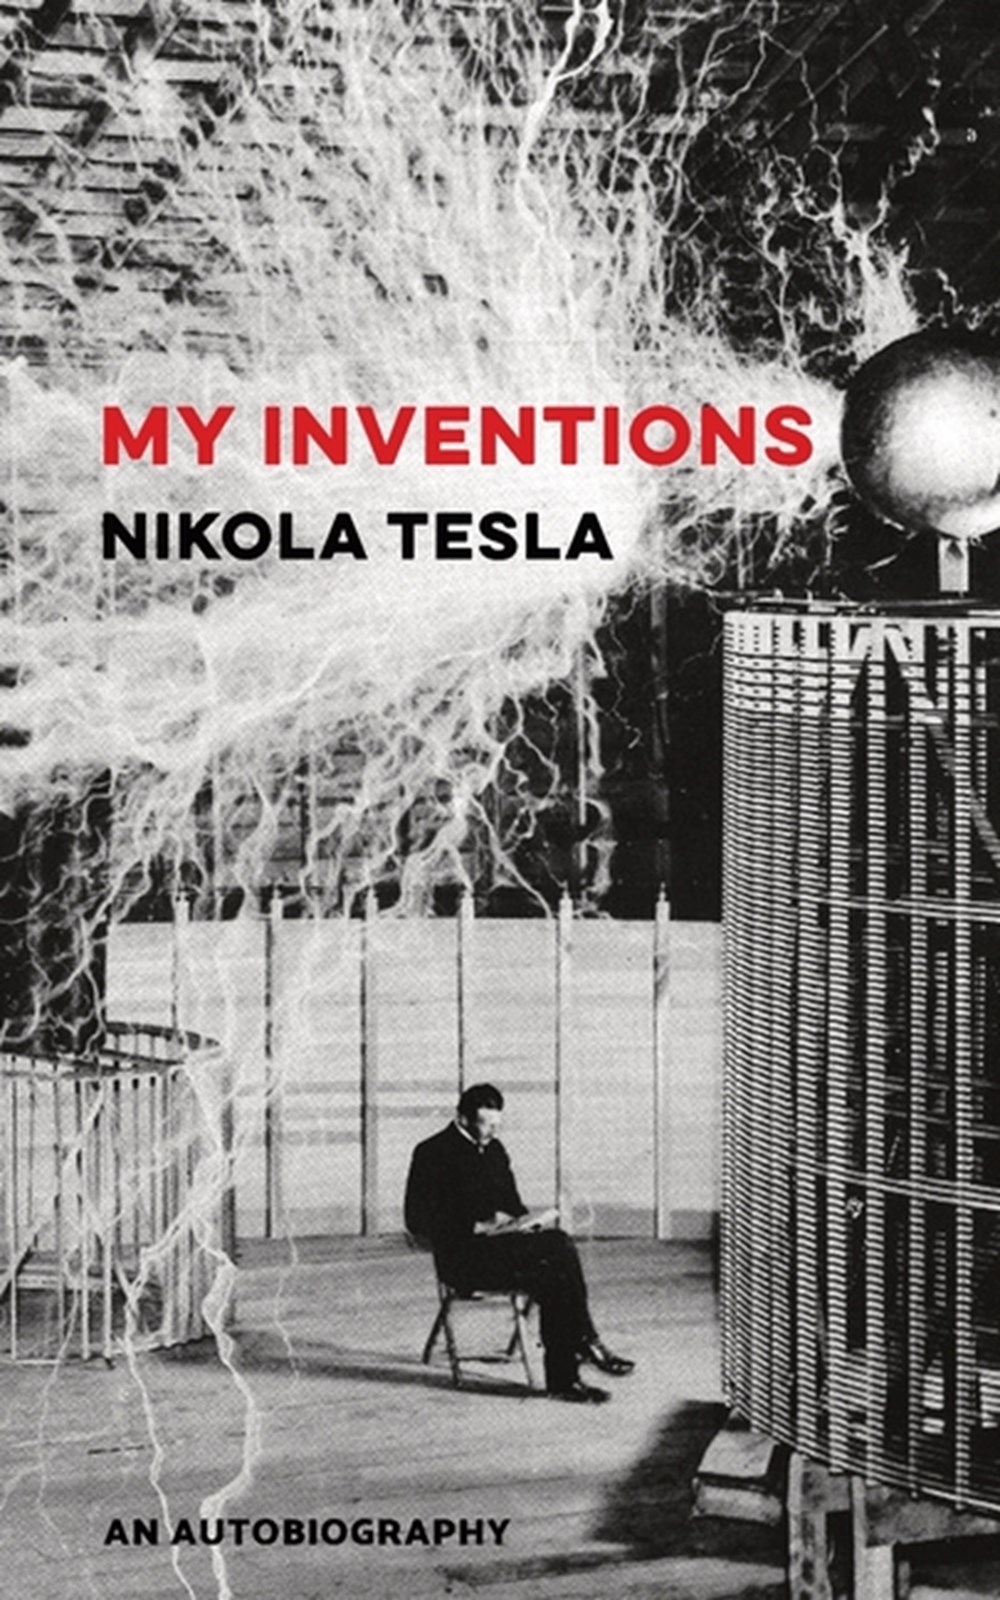 Buy My Inventions by Nikola Tesla (9780648859451) from Porchlight Book Company